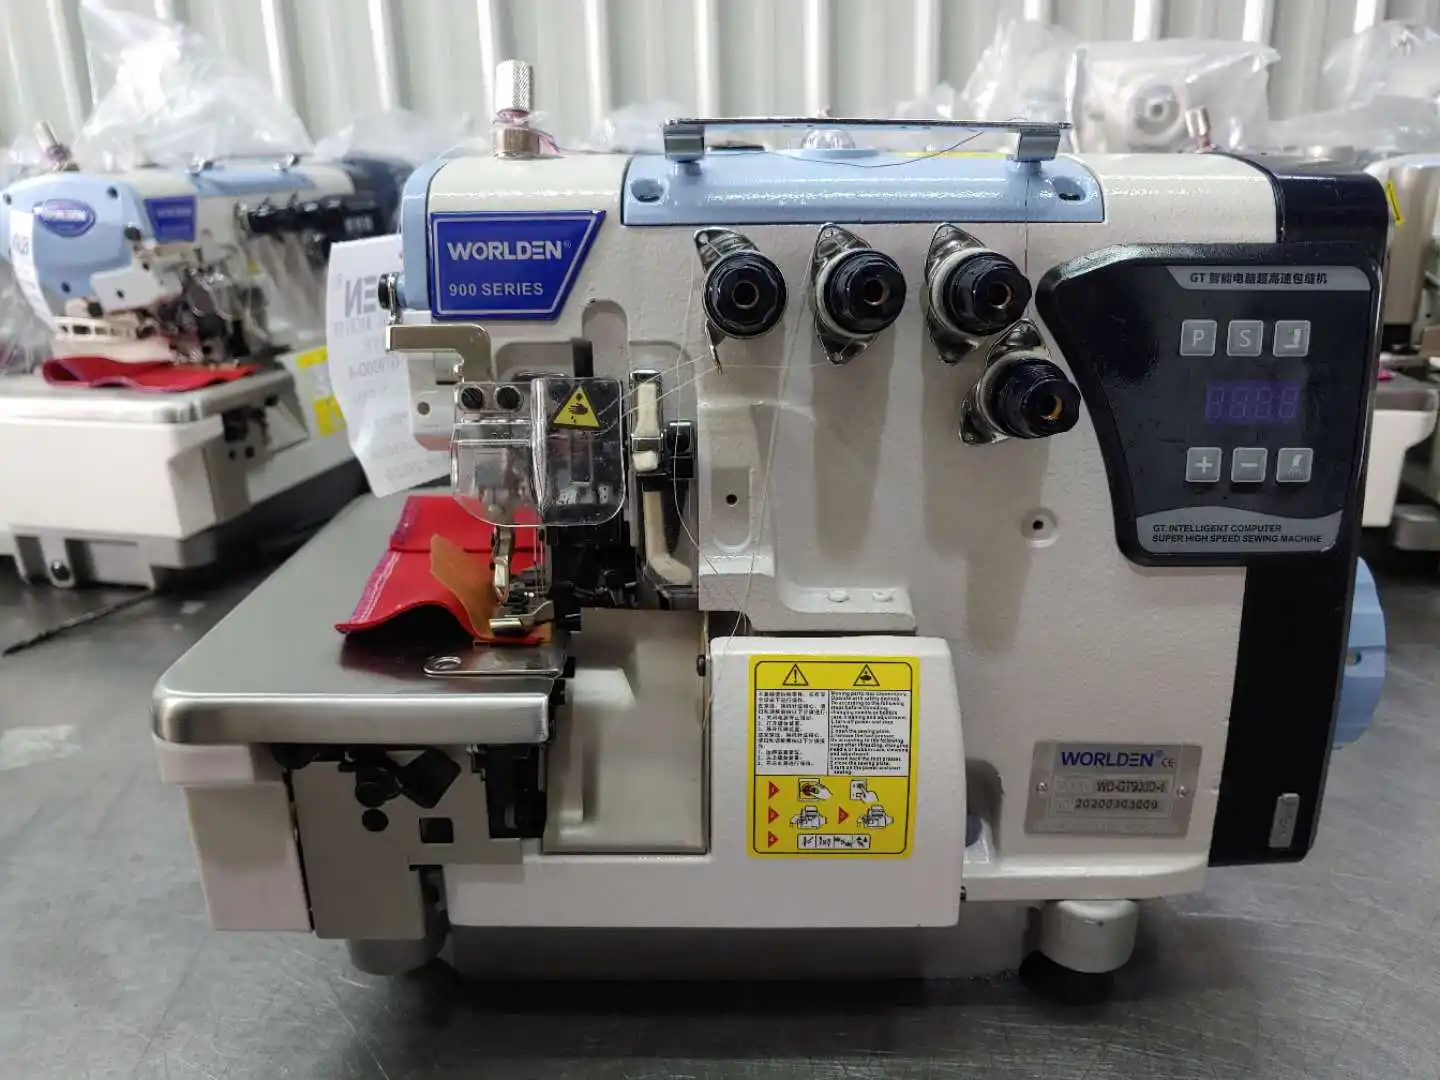 WD-GT900D-4 High quality 4 thread high speed direct drive Automatic Industrial overlock clothing sewing machine